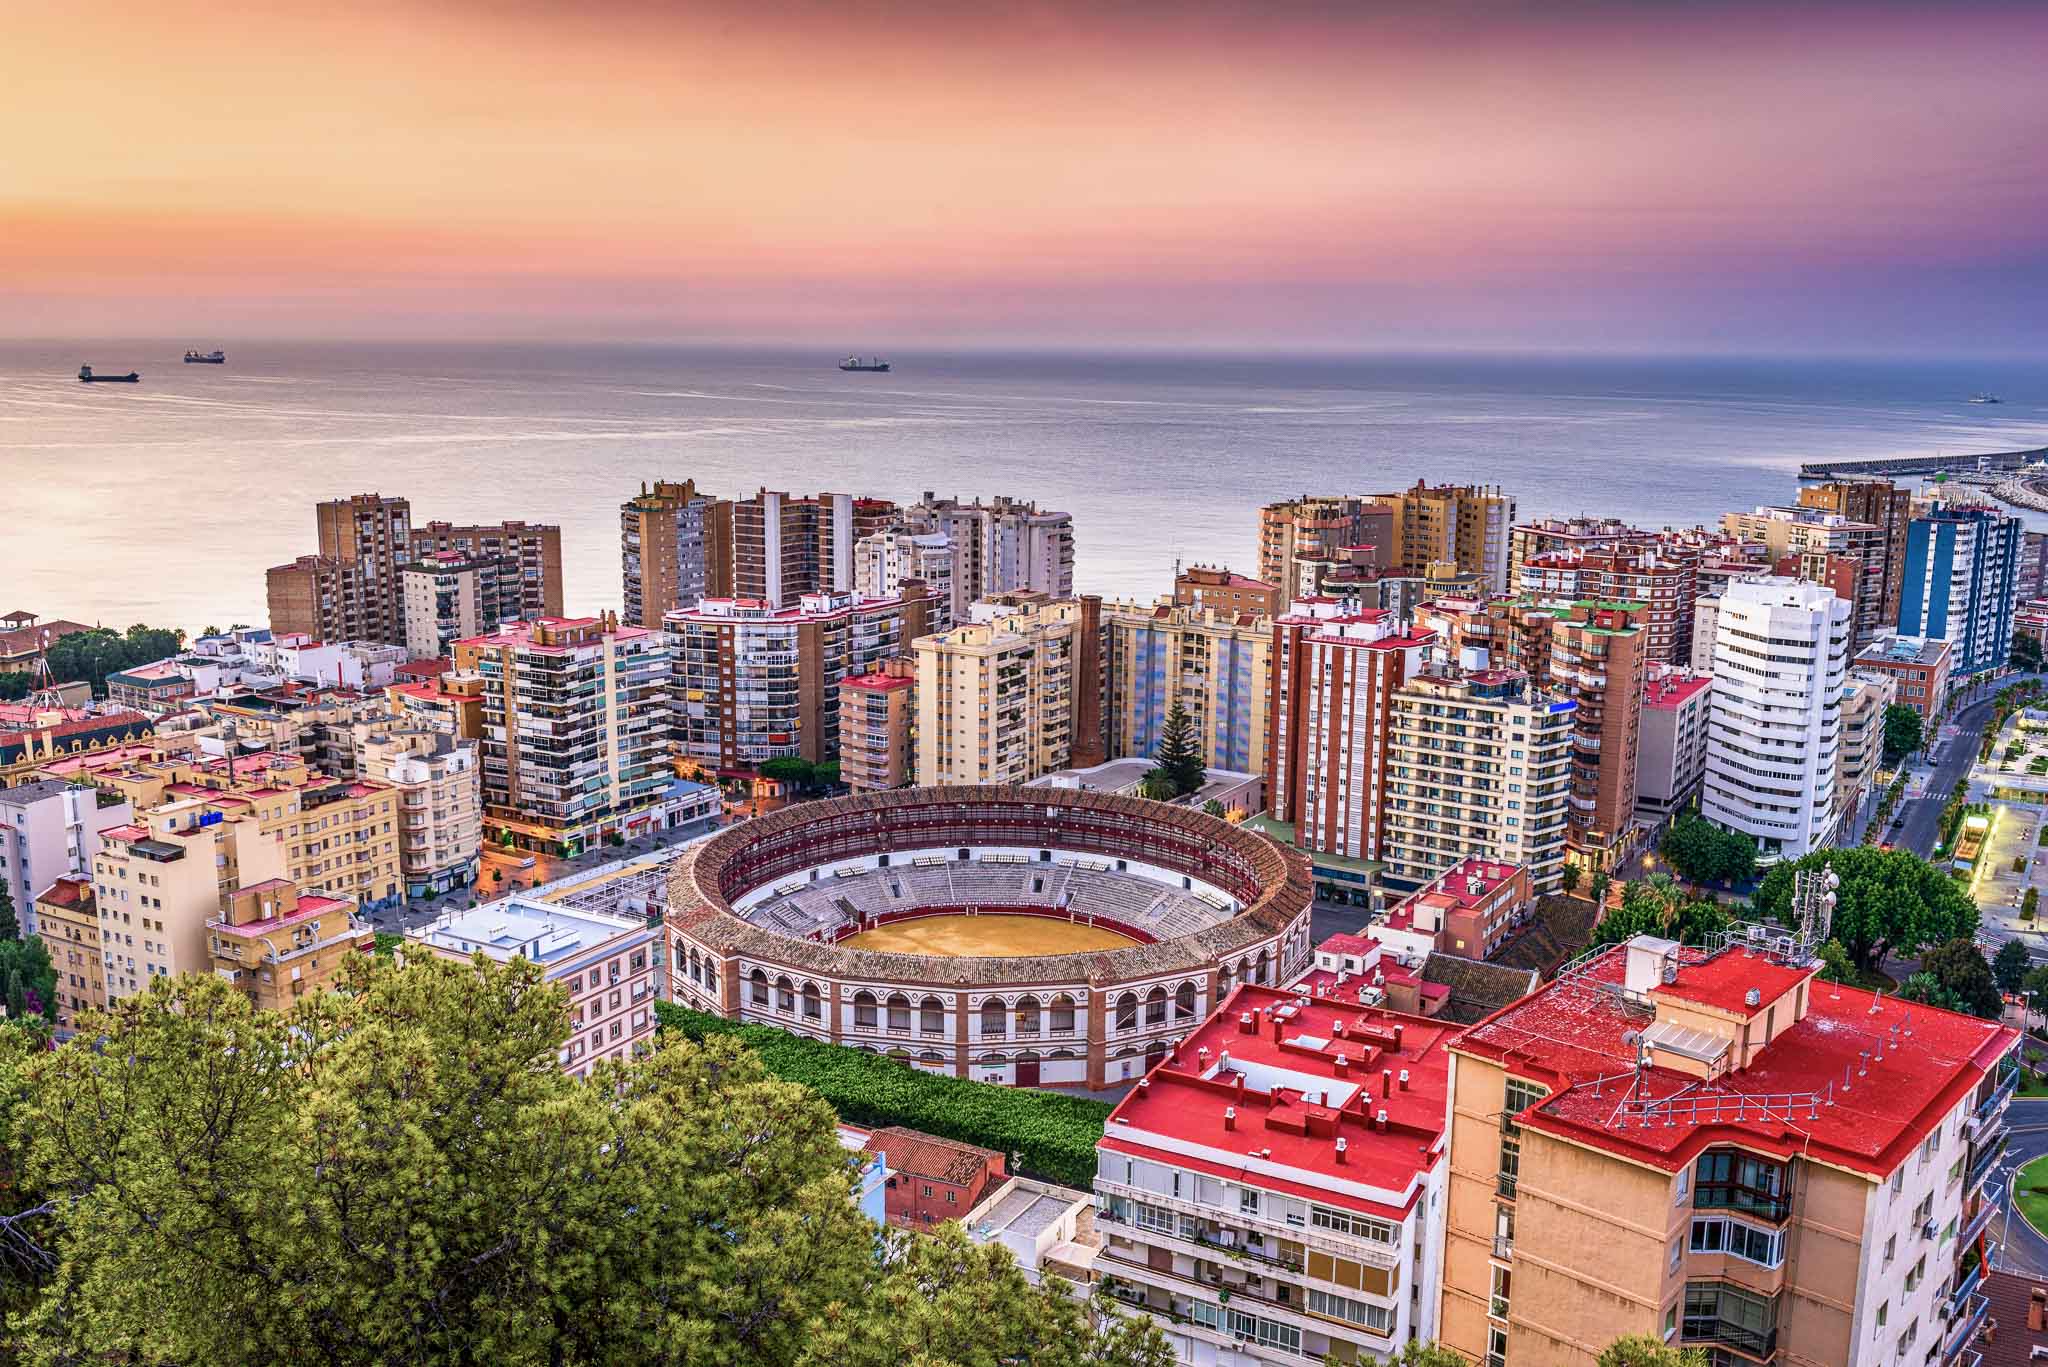 25 Best Things Do in Malaga, Spain (Costa del Sol) An Ultimate Travel Guide - The Vienna BLOG